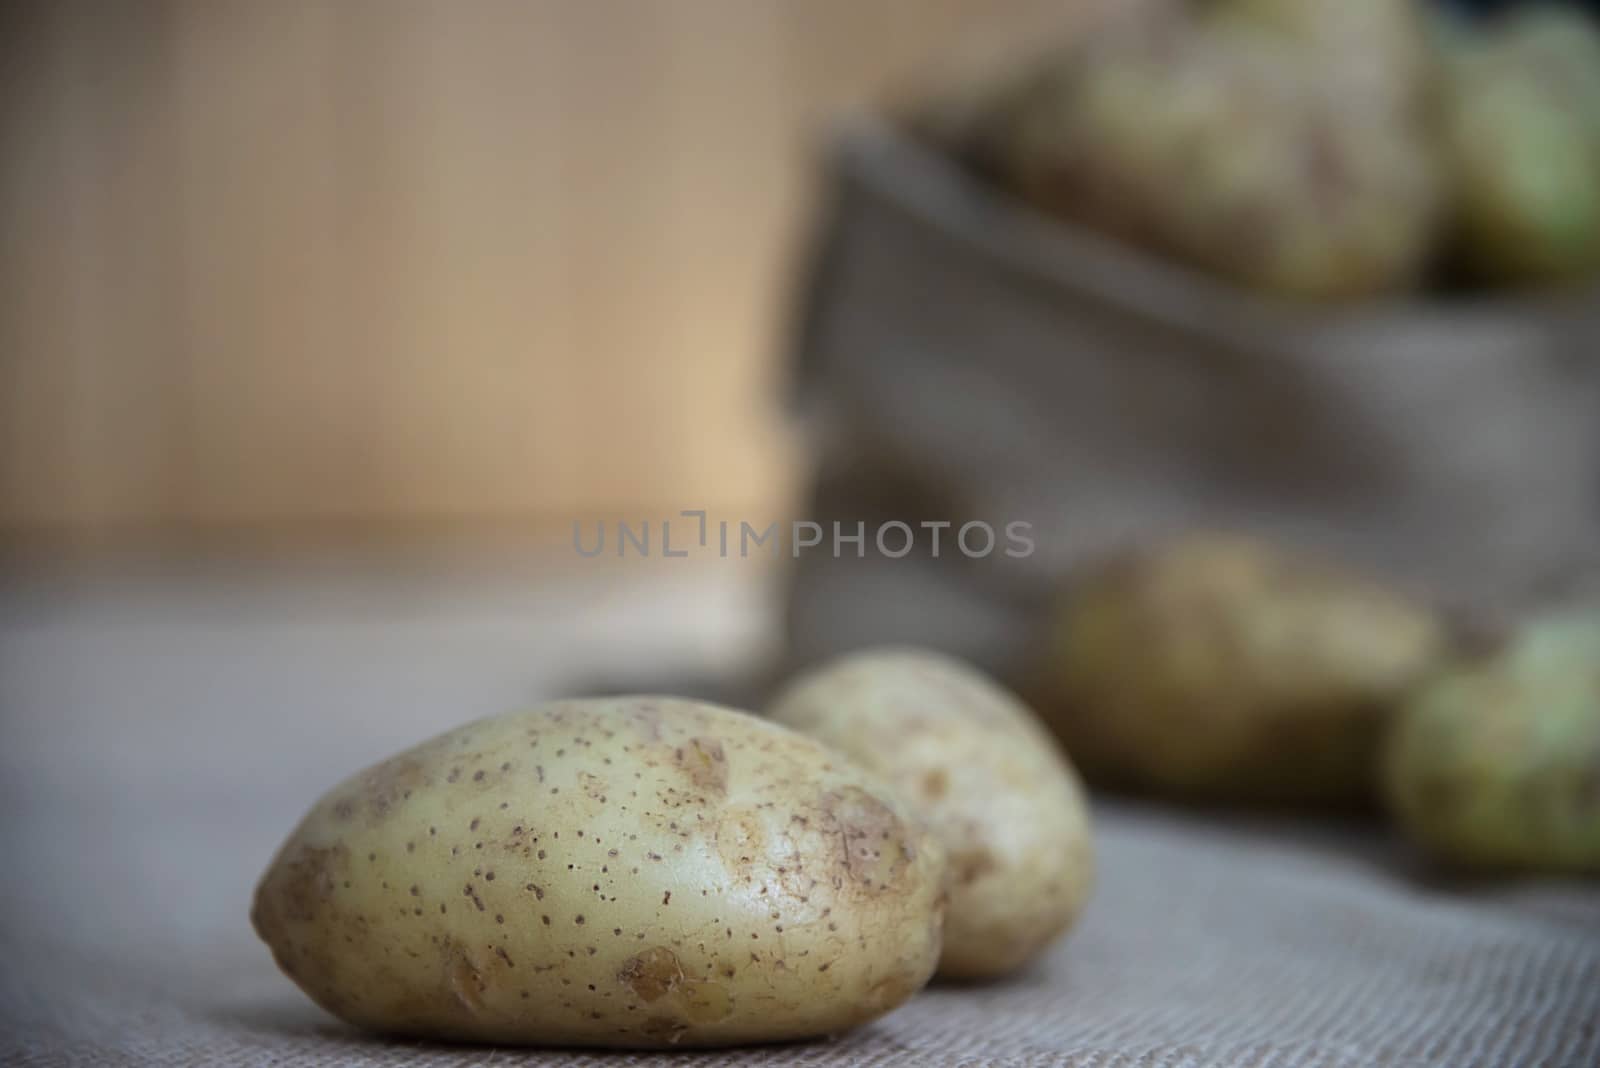 Fresh potato ready for cooking with potato sack background - potato cooking concept by pairhandmade